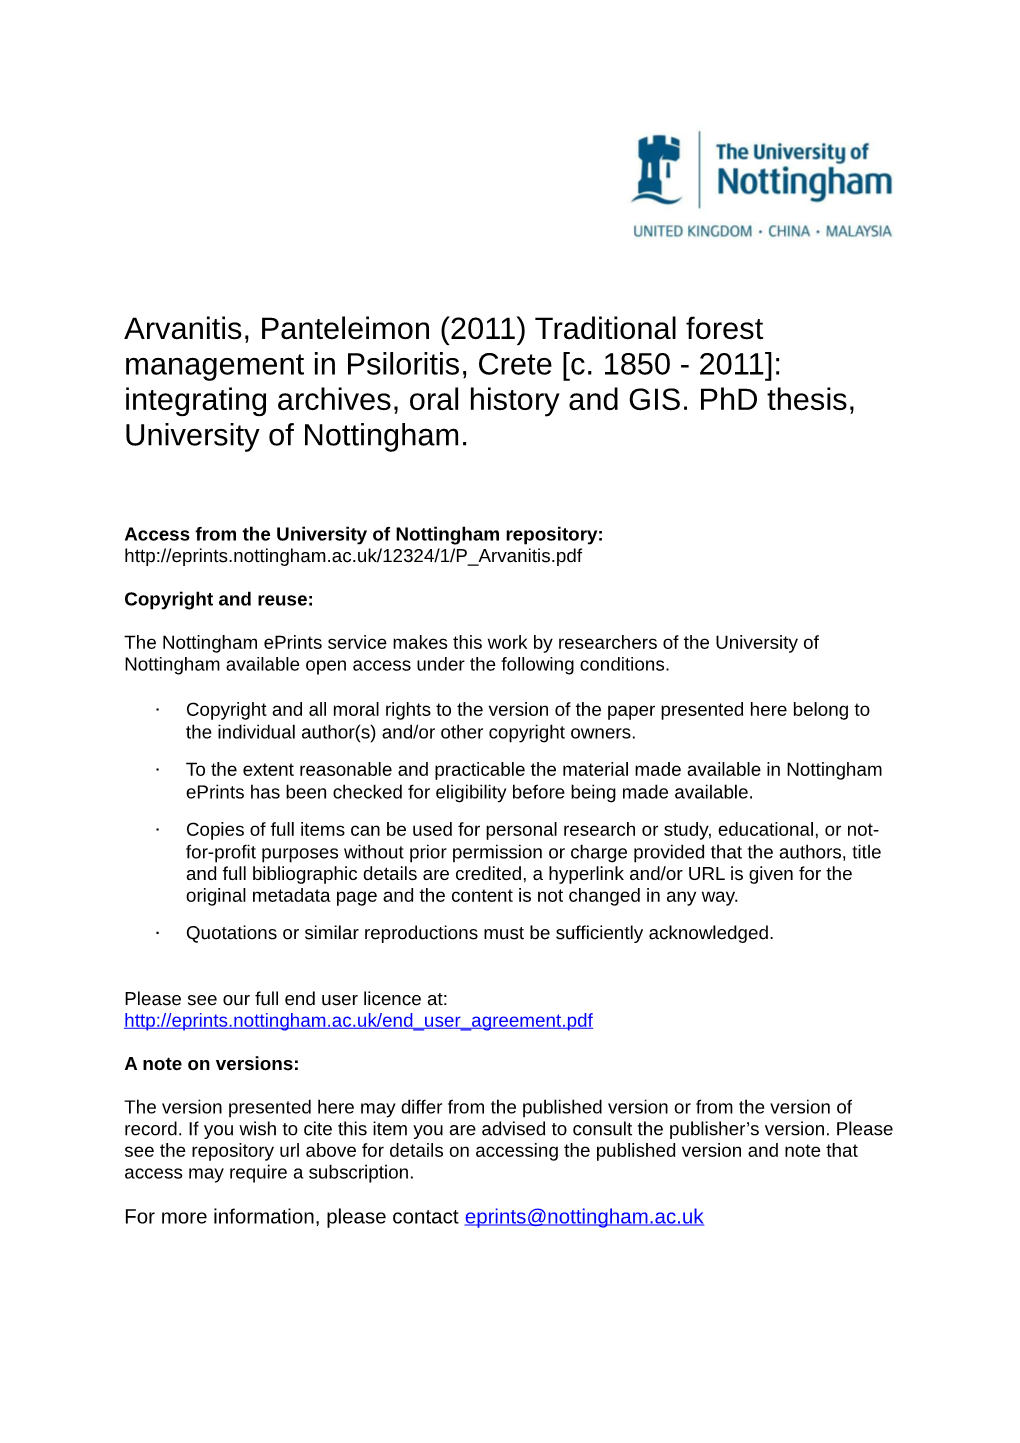 C. 1850 - 2011]: Integrating Archives, Oral History and GIS